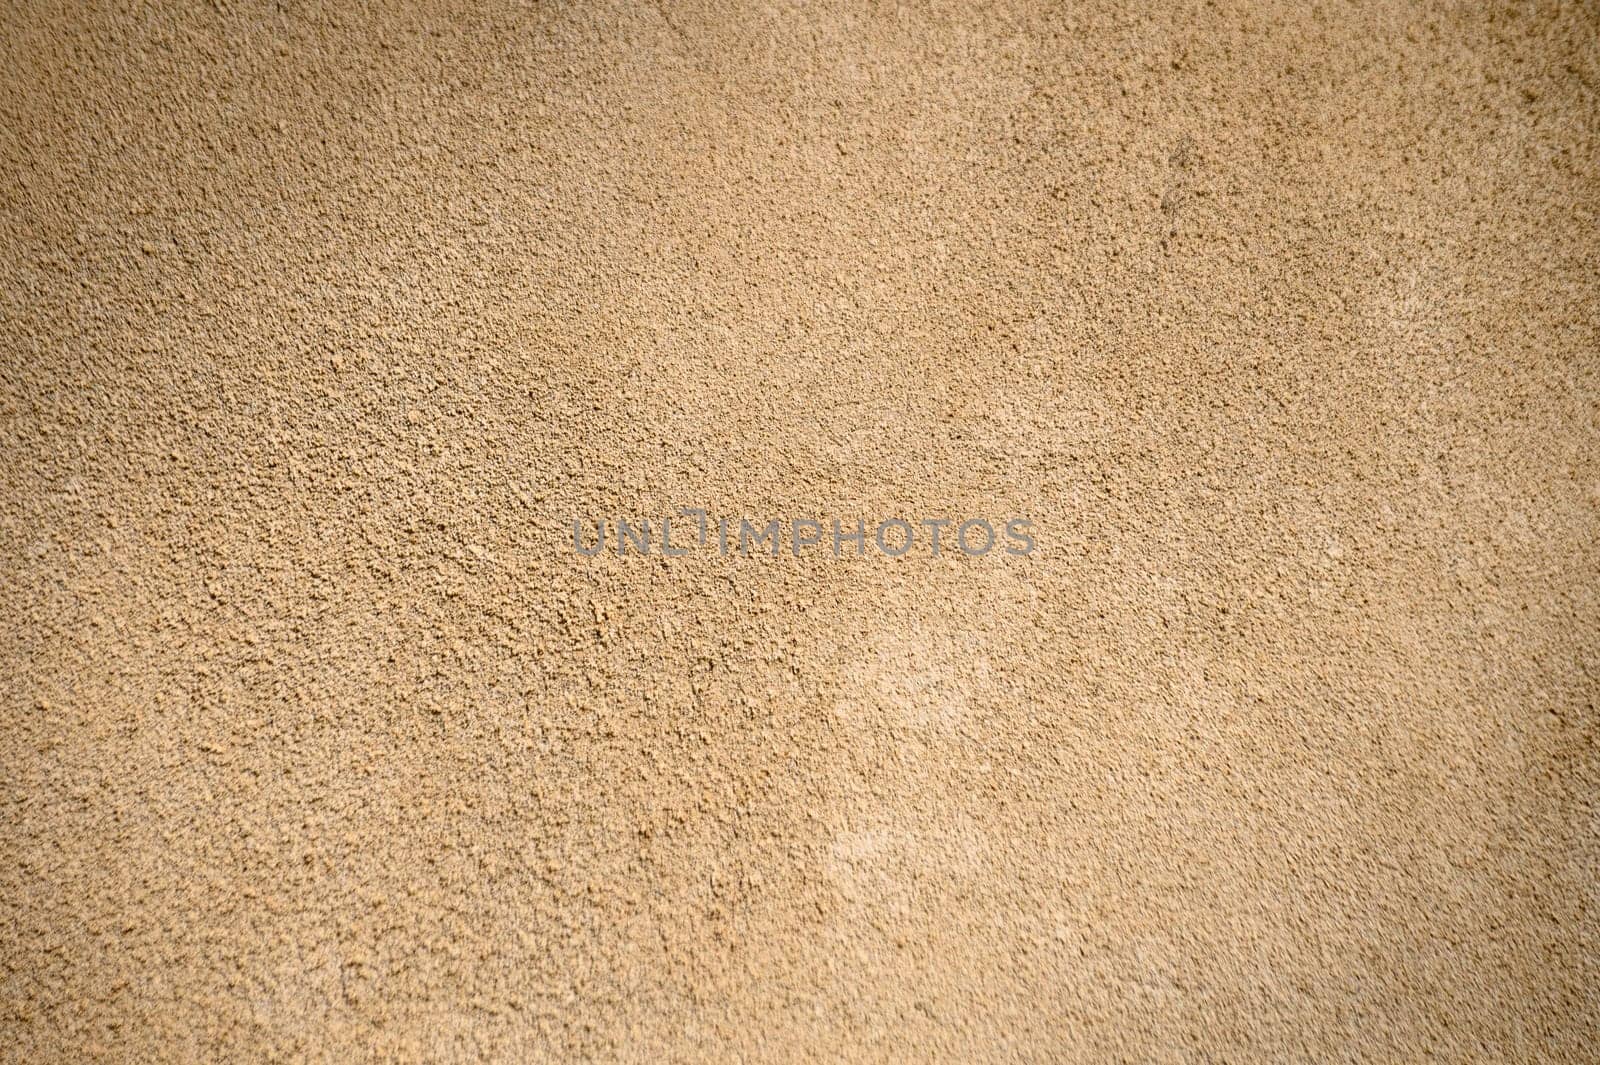 Beige plastered wall texture background 1 by Mixa74